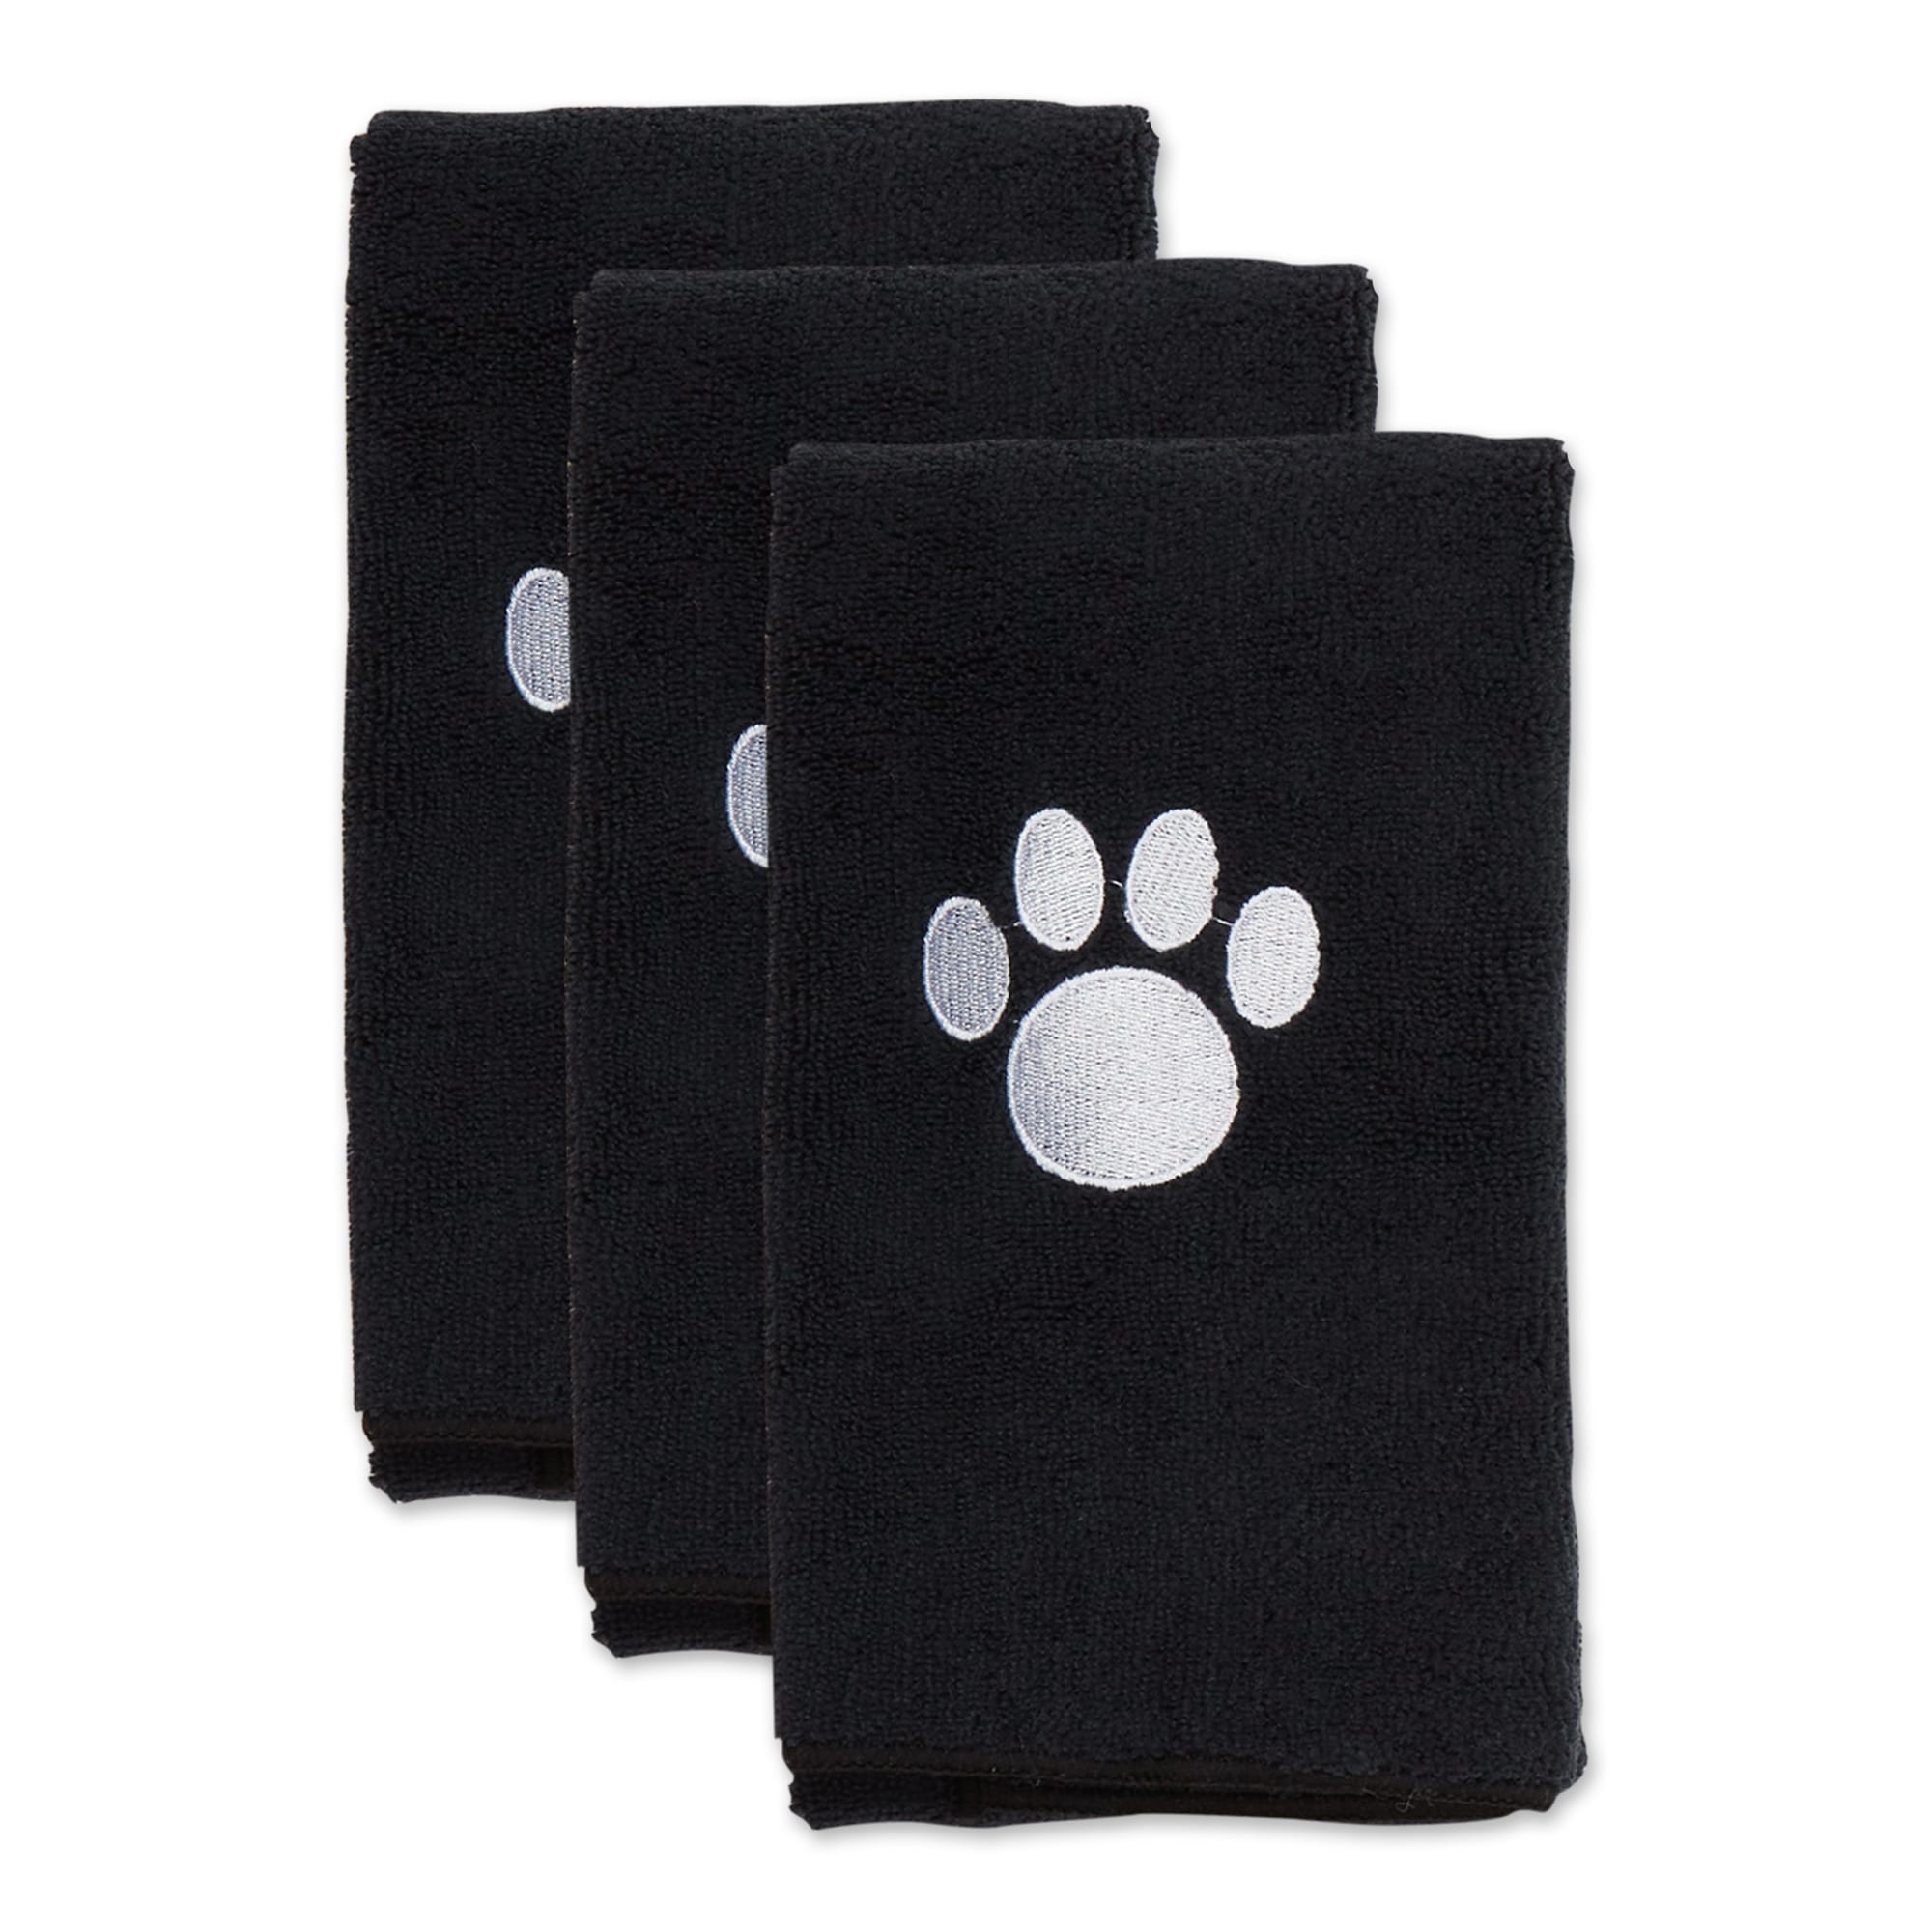 Embroidered Paw Small Pet Towel Set of 3